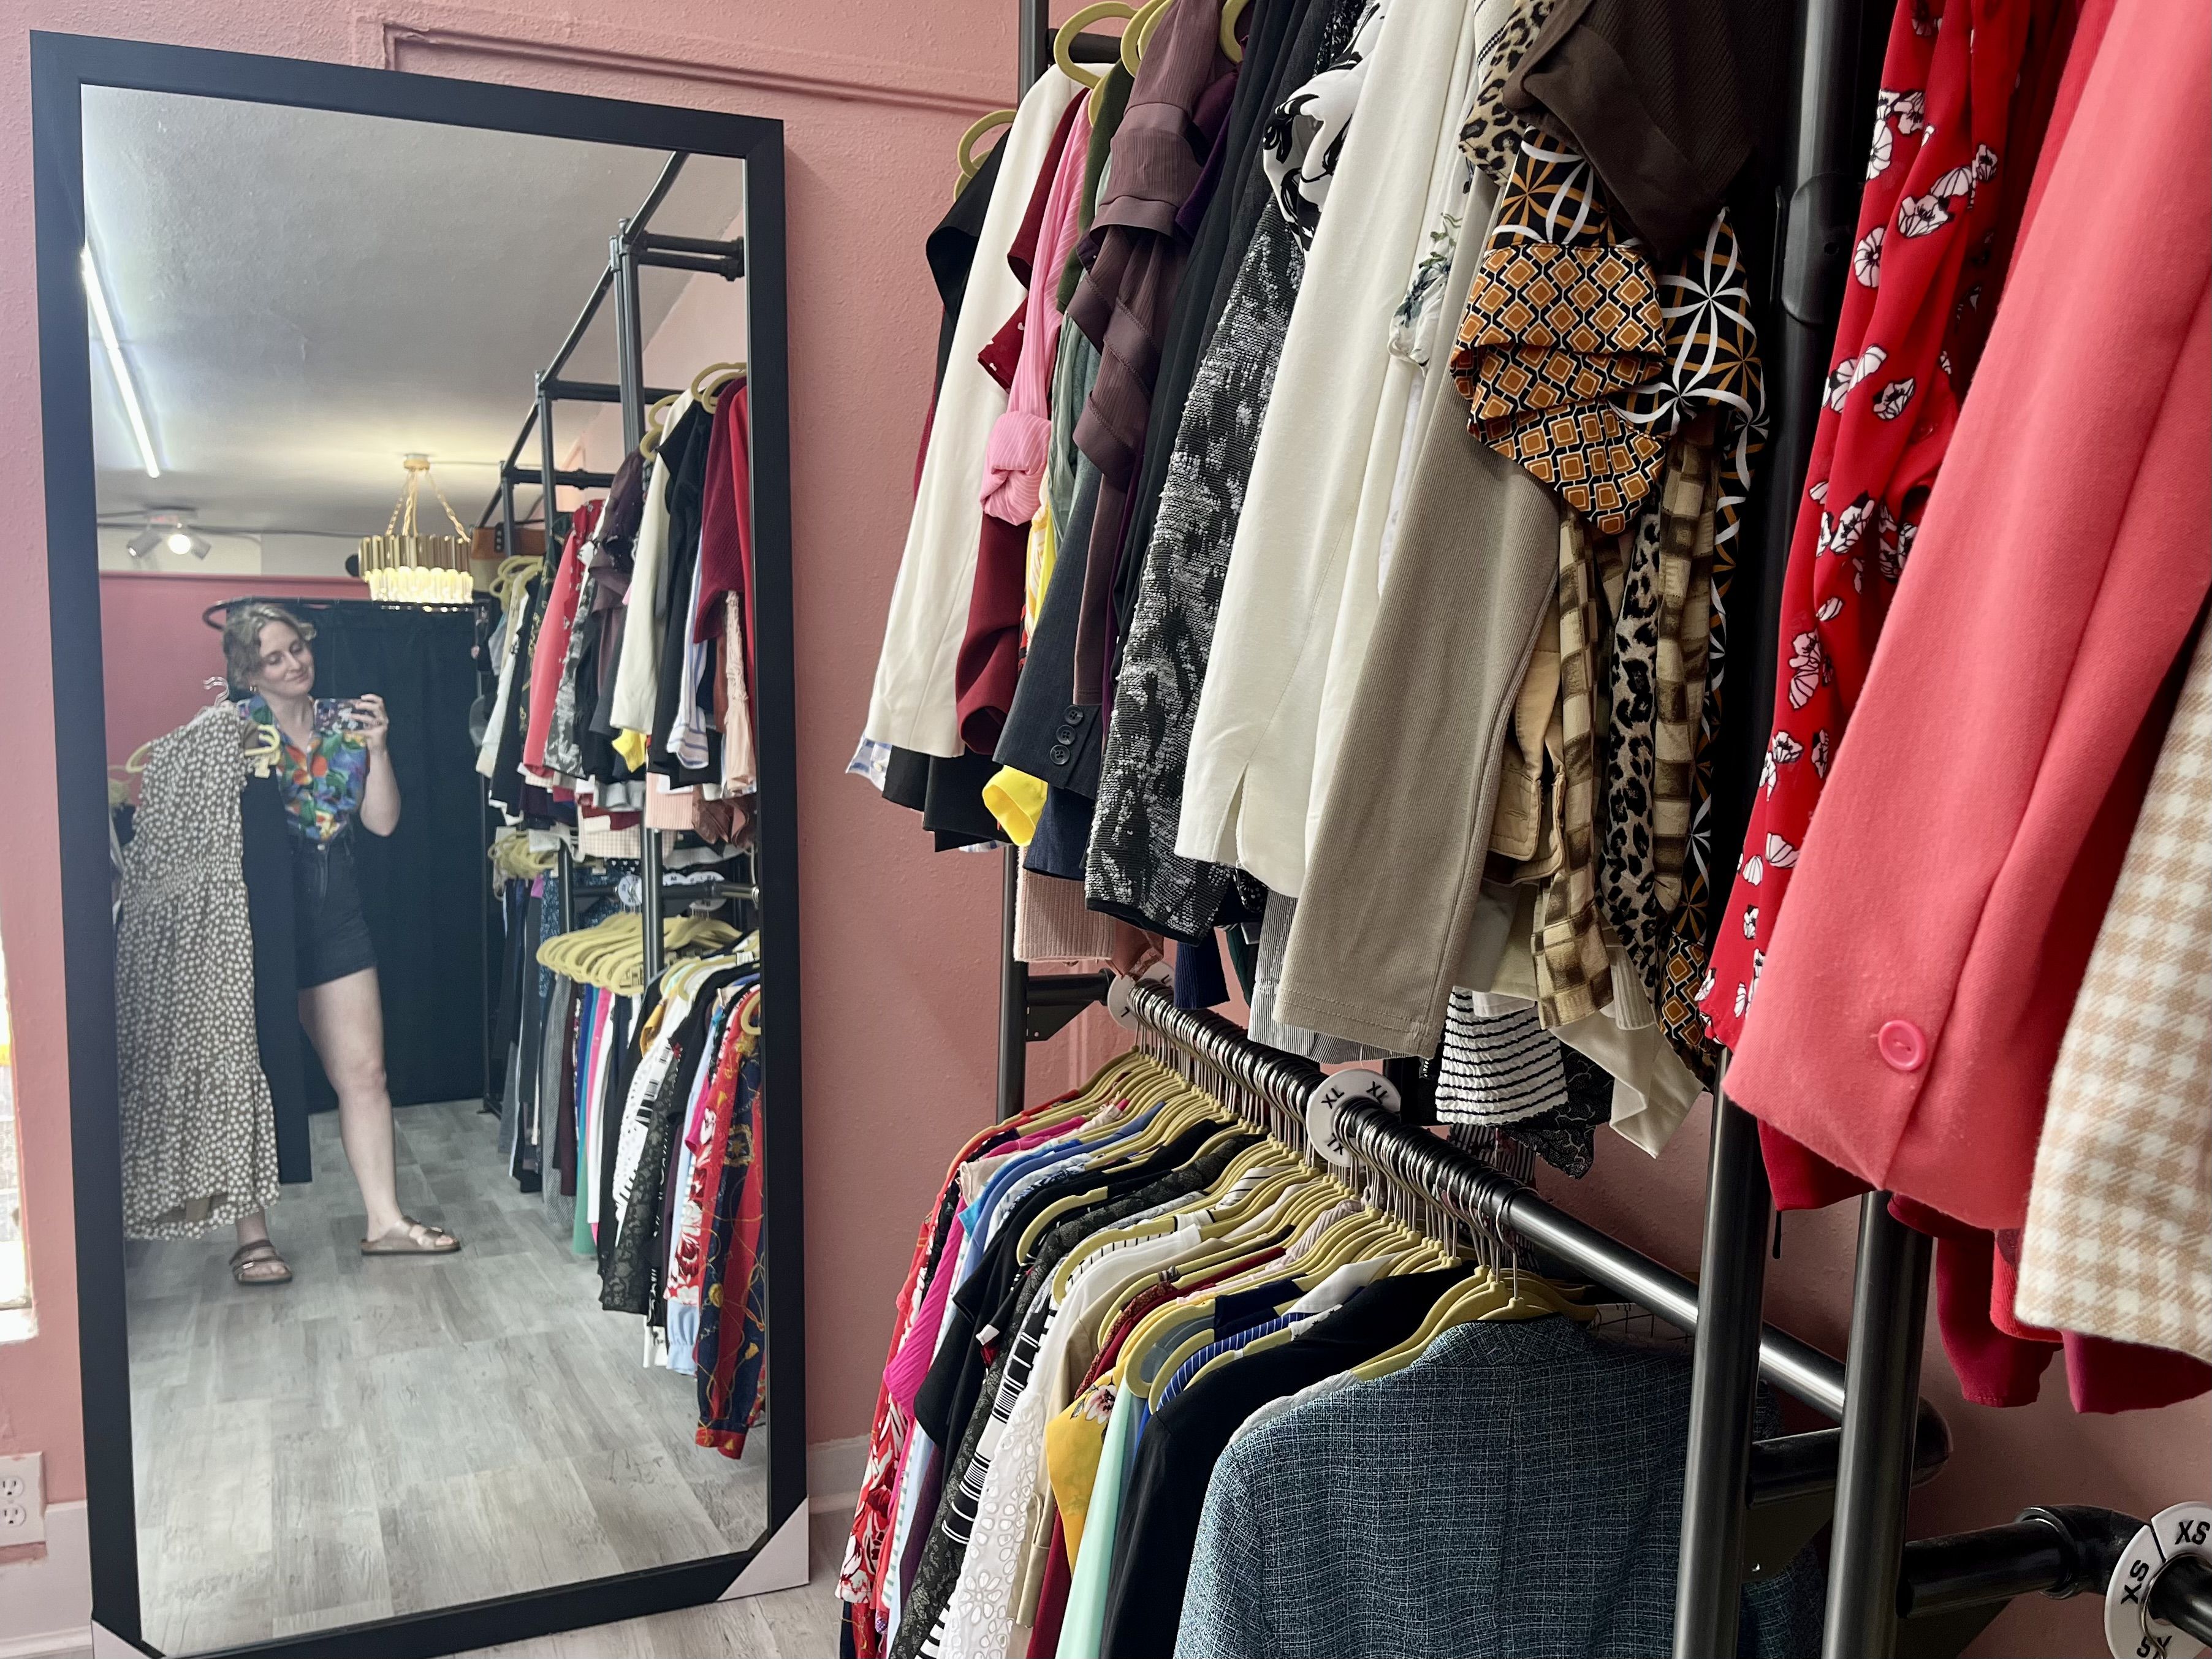 A woman taking a mirror selfie next to racks of clothing.